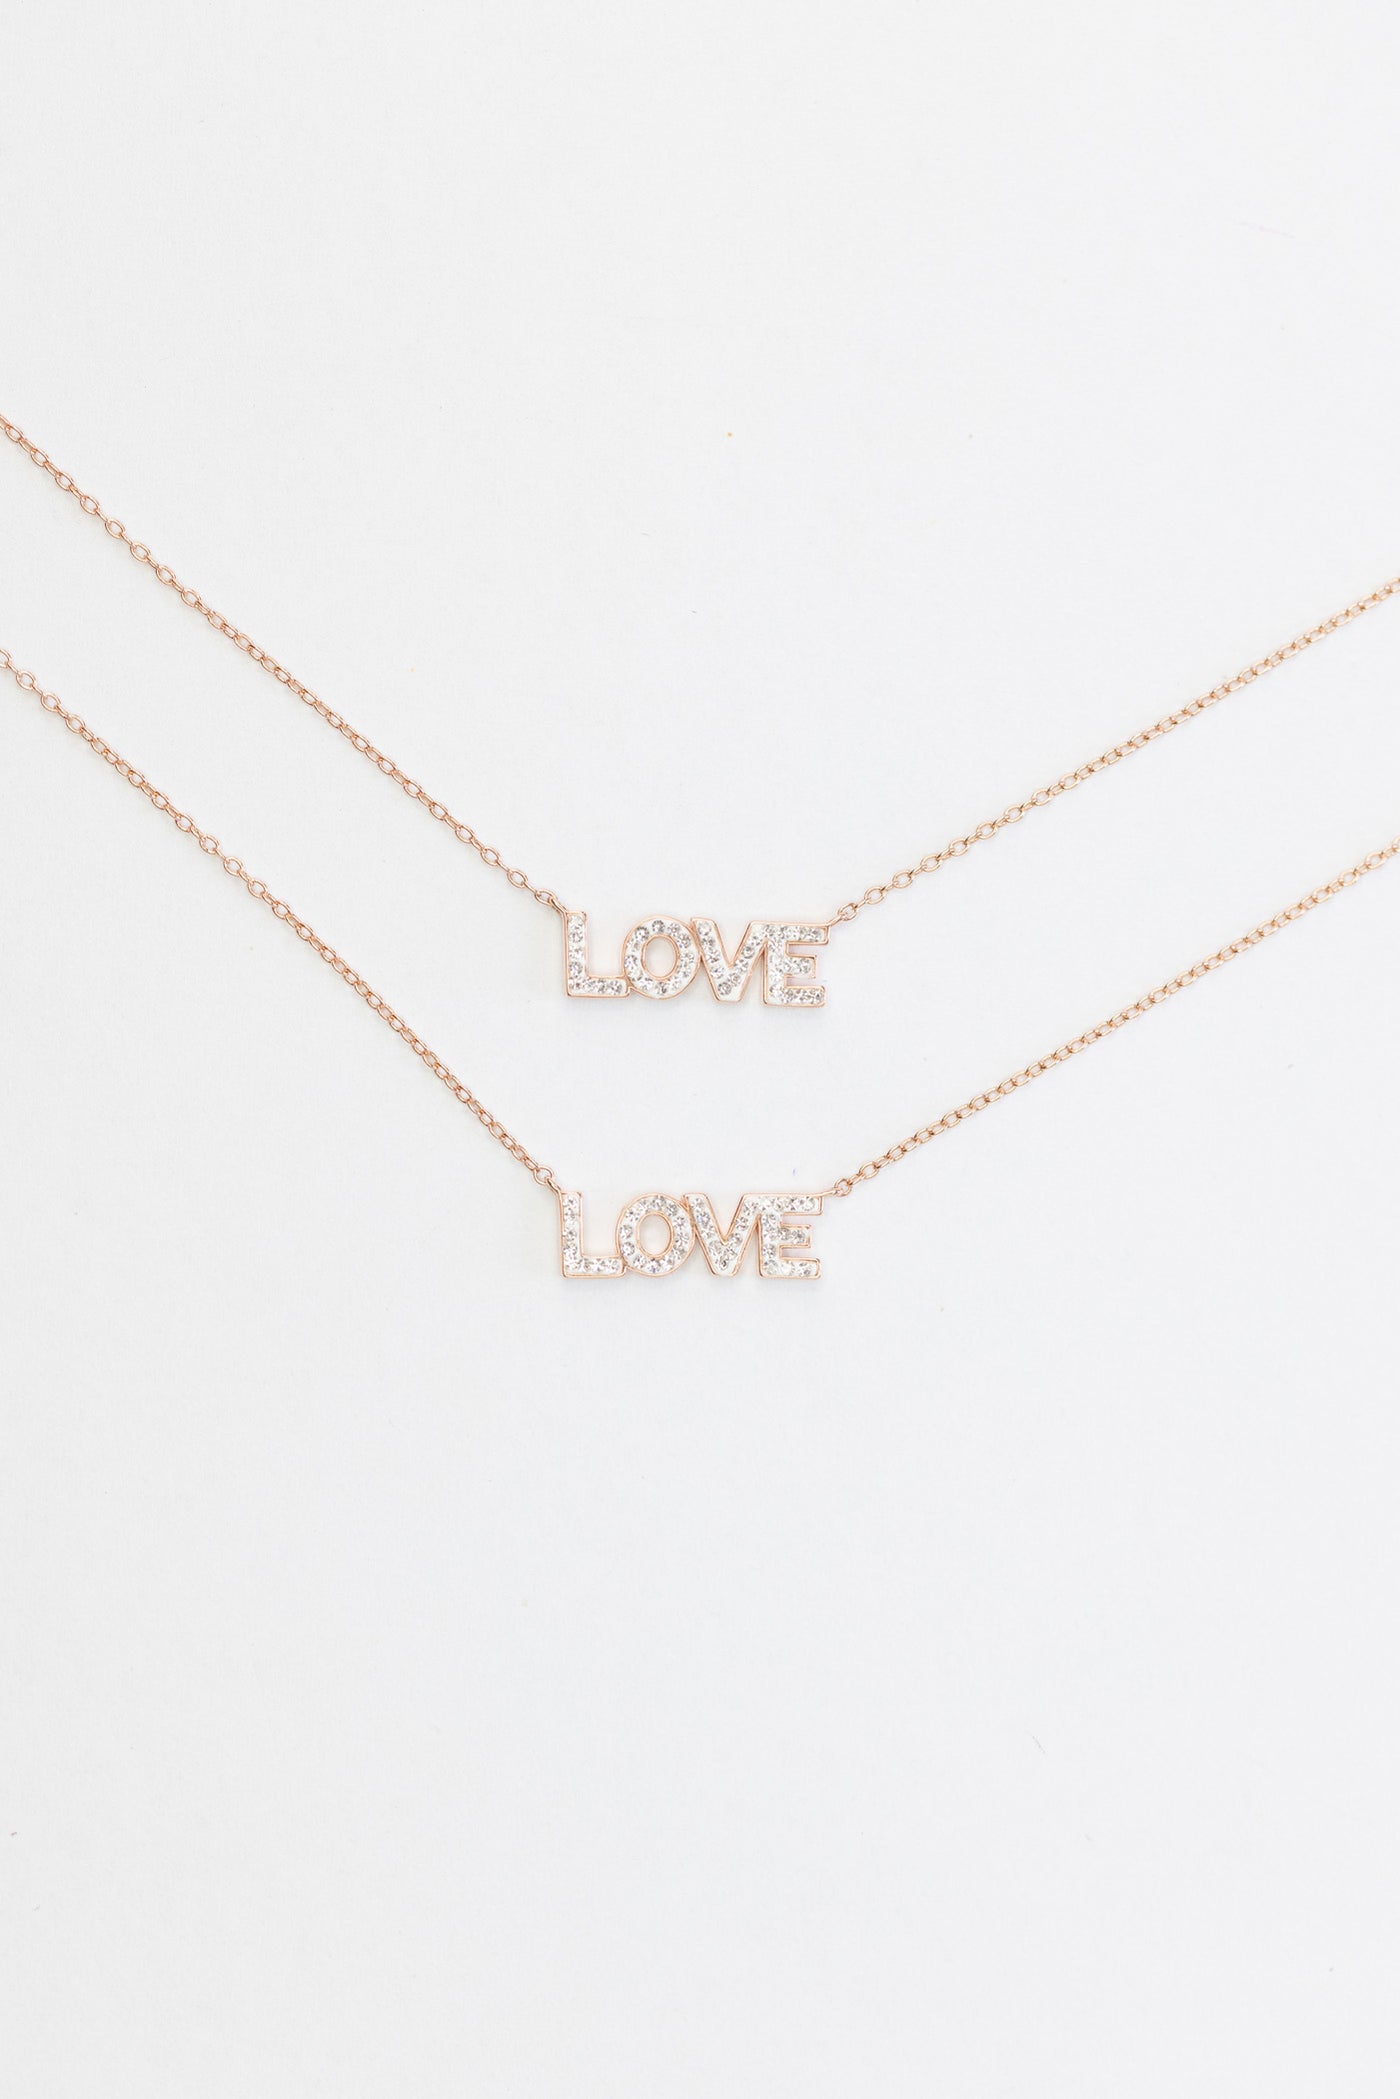 LOVE Crystal Sterling Silver Necklace | Annie and Sisters